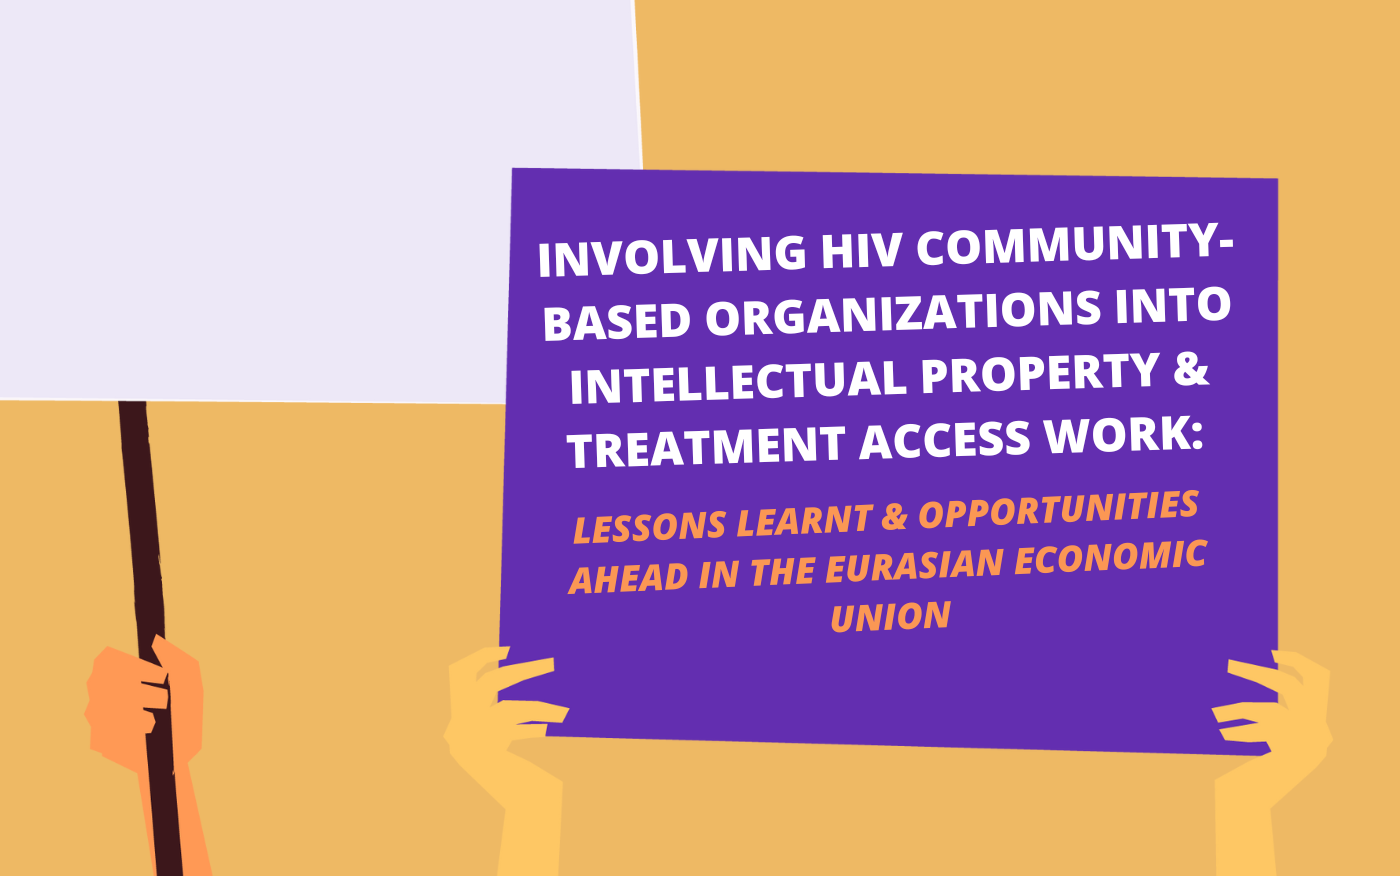 Involving HIV community-based organizations into intellectual property and treatment access work: lessons learnt and opportunities ahead in the Eurasian Economic Union